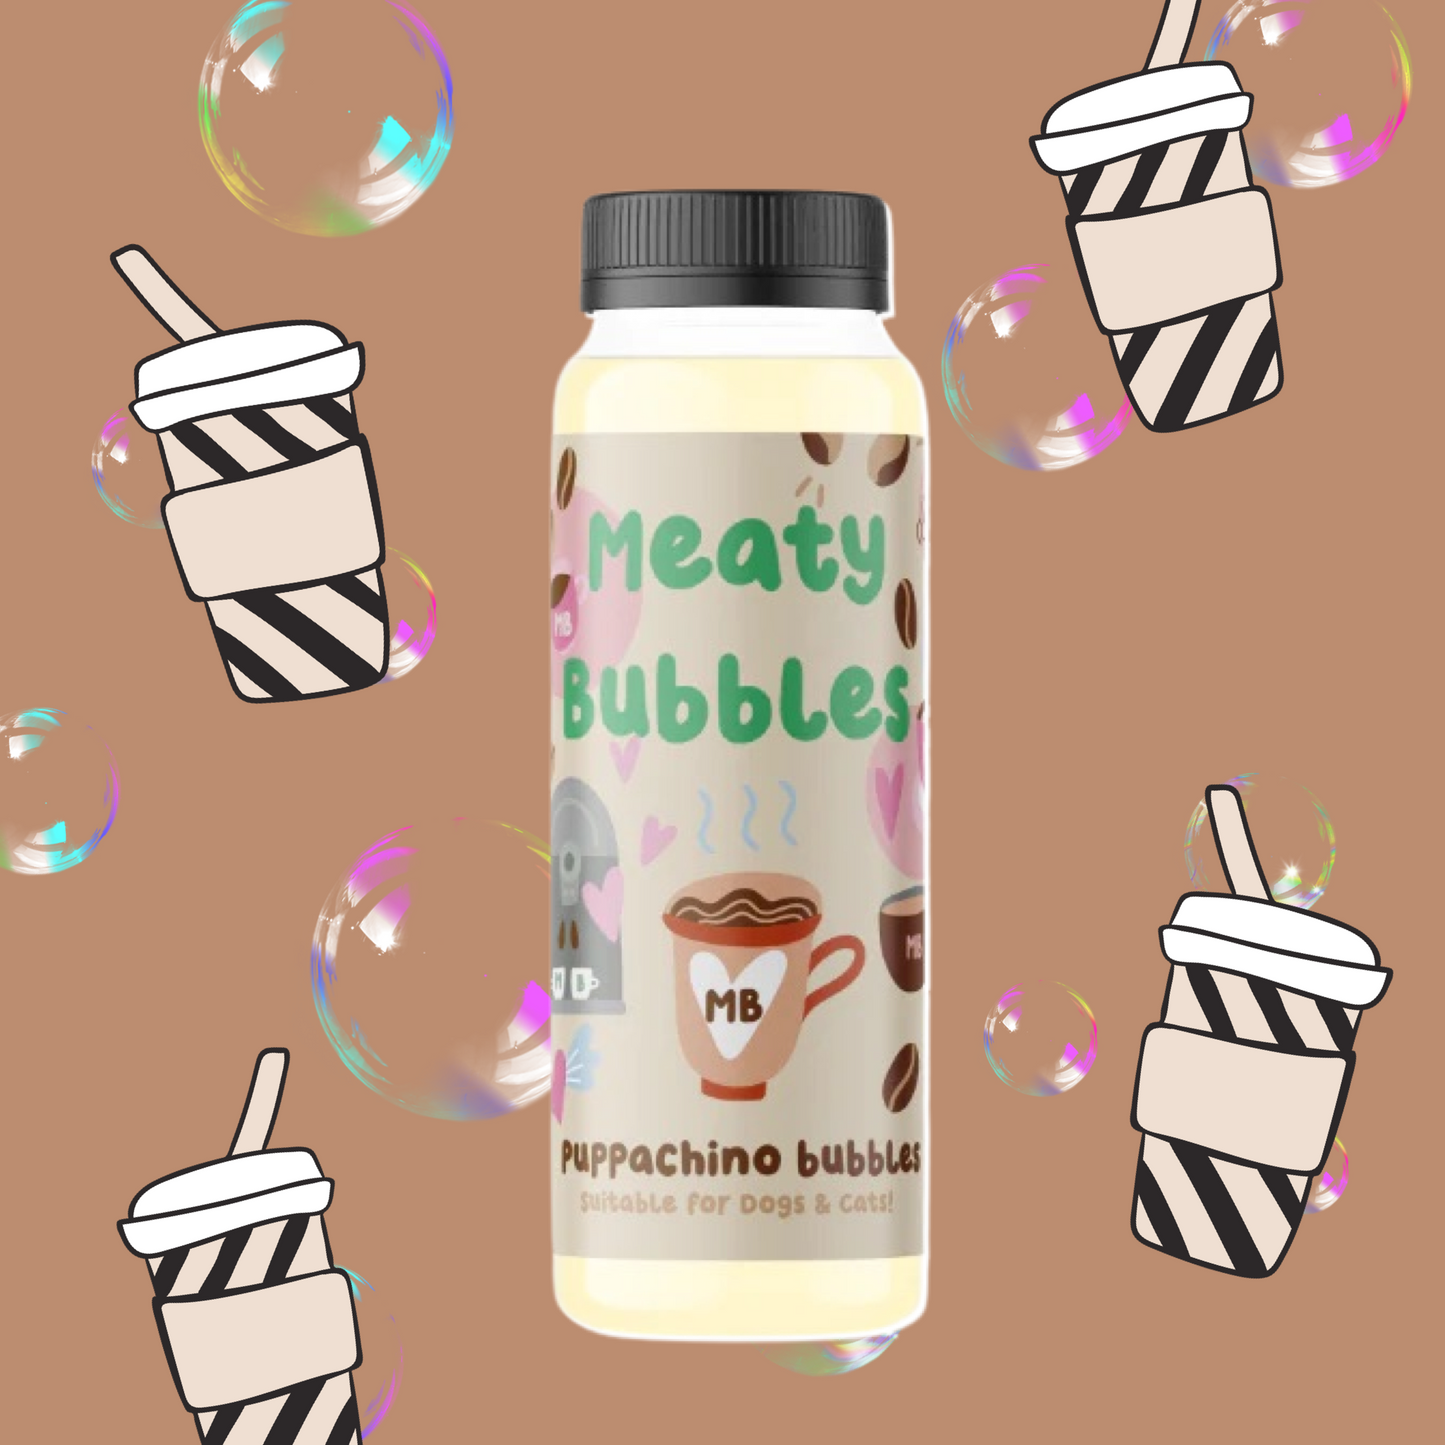 Meaty Bubbles - Puppachino Flavoured Bubbles for Dogs and Puppies